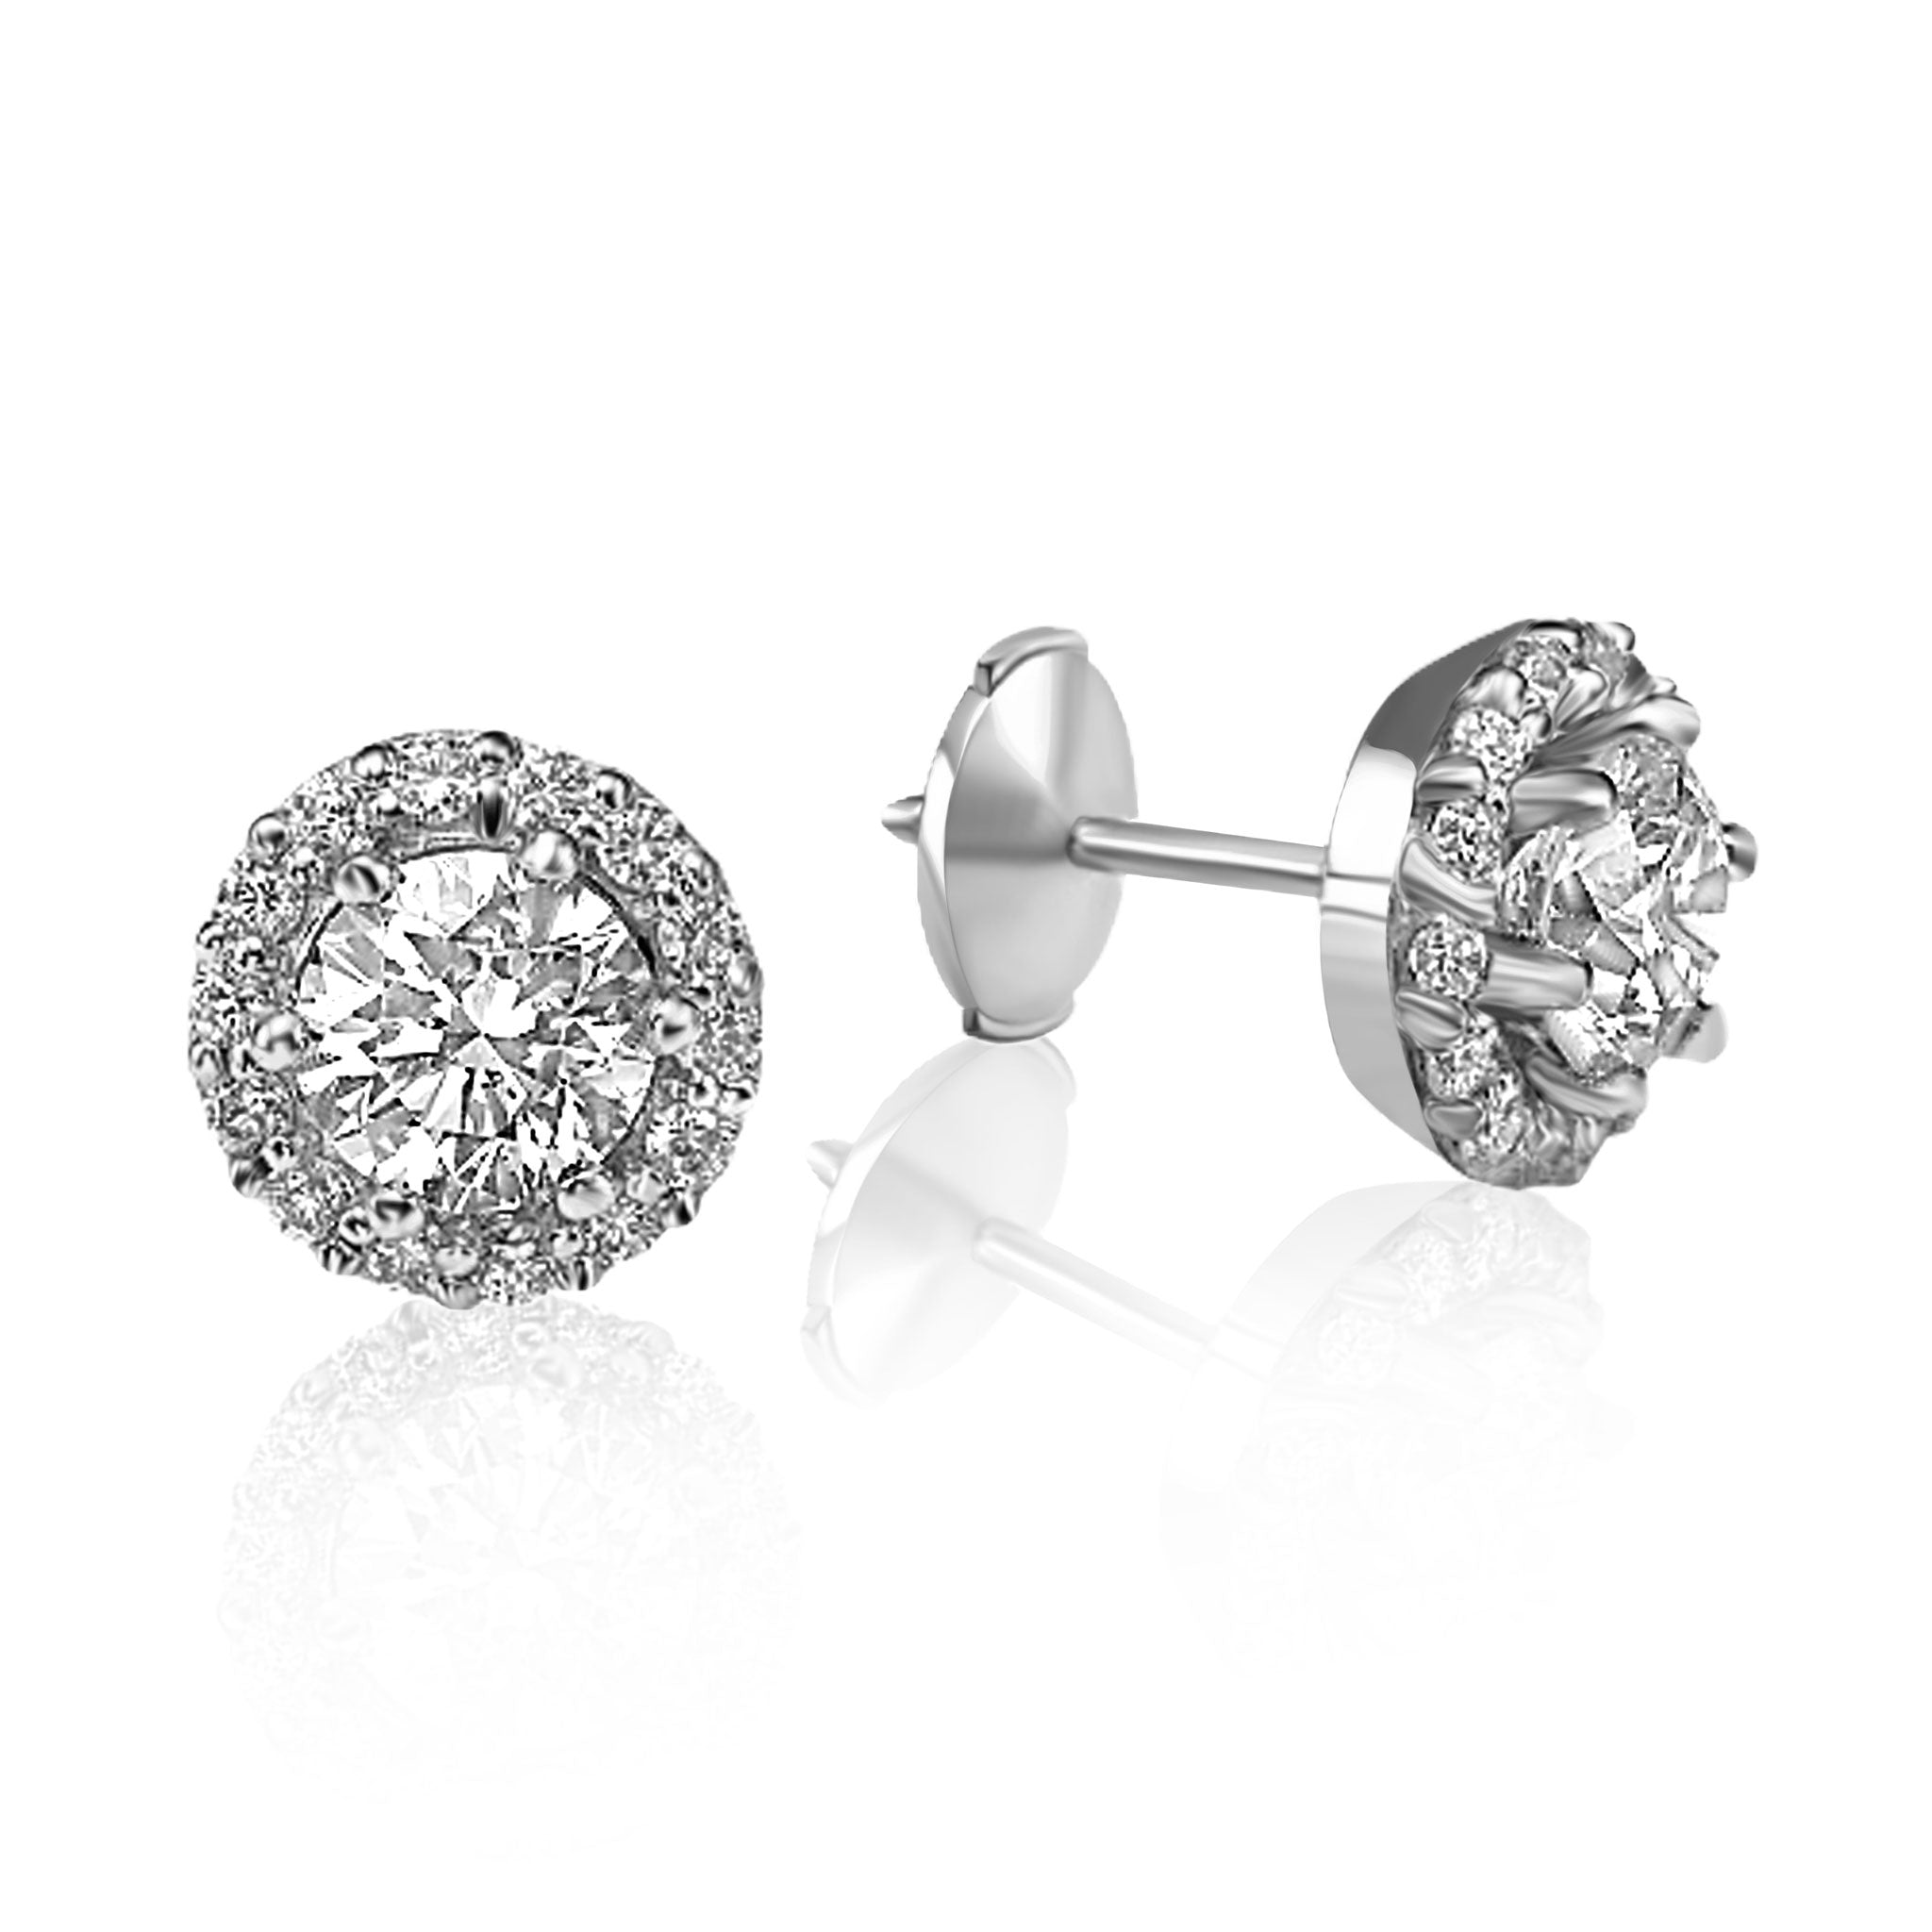 Center Of Stone - Halo Settings Stud Earrings - Real Natural Diamonds